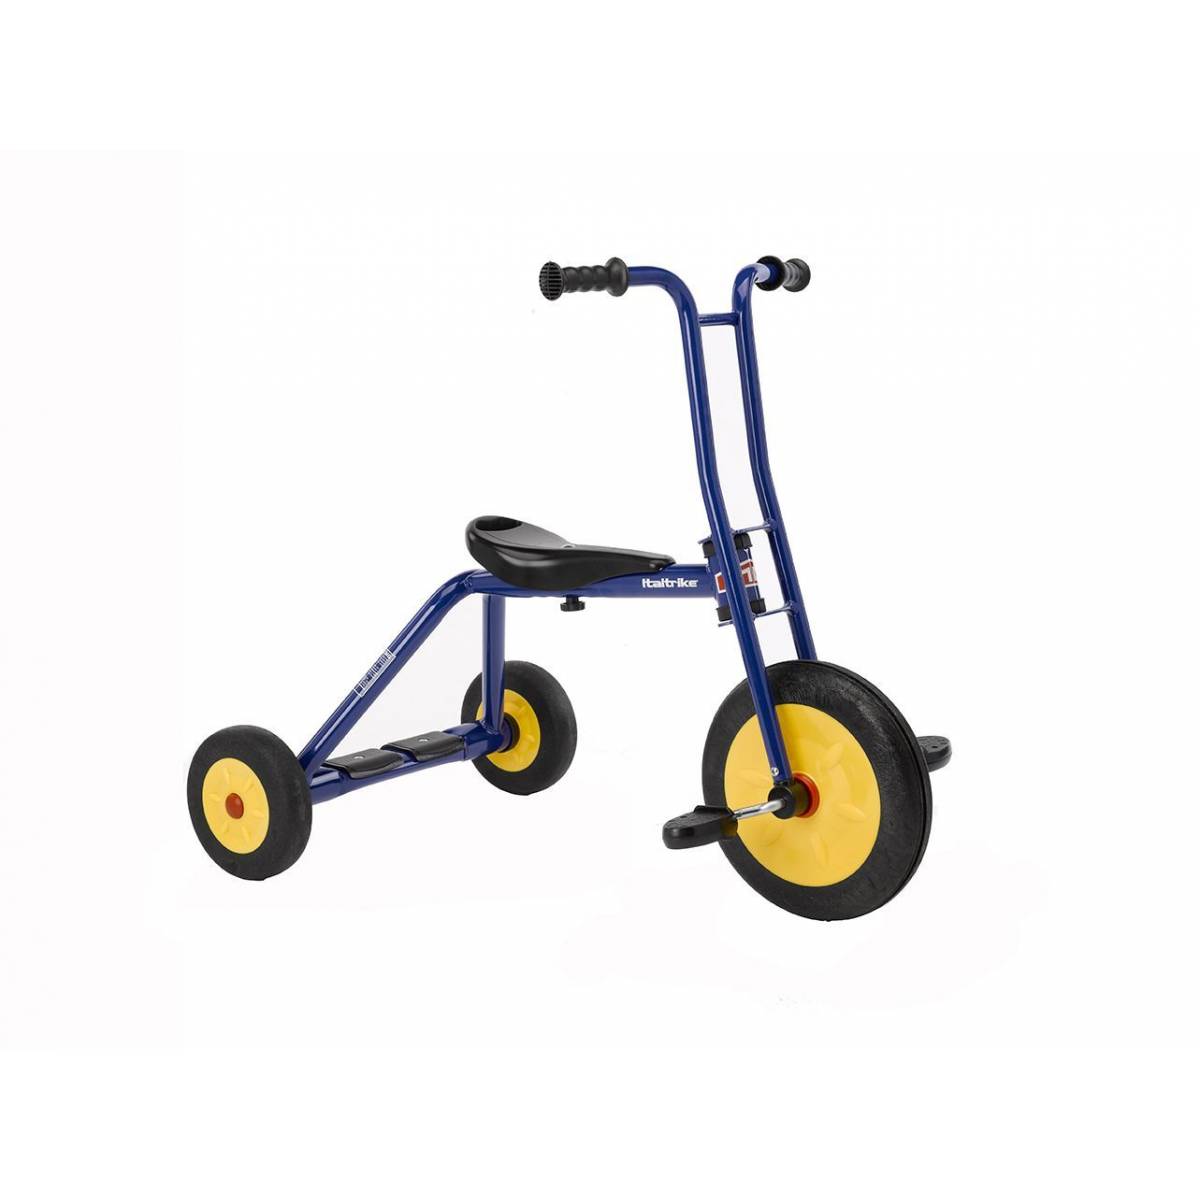 Atlantic Tricycle - Small 10"